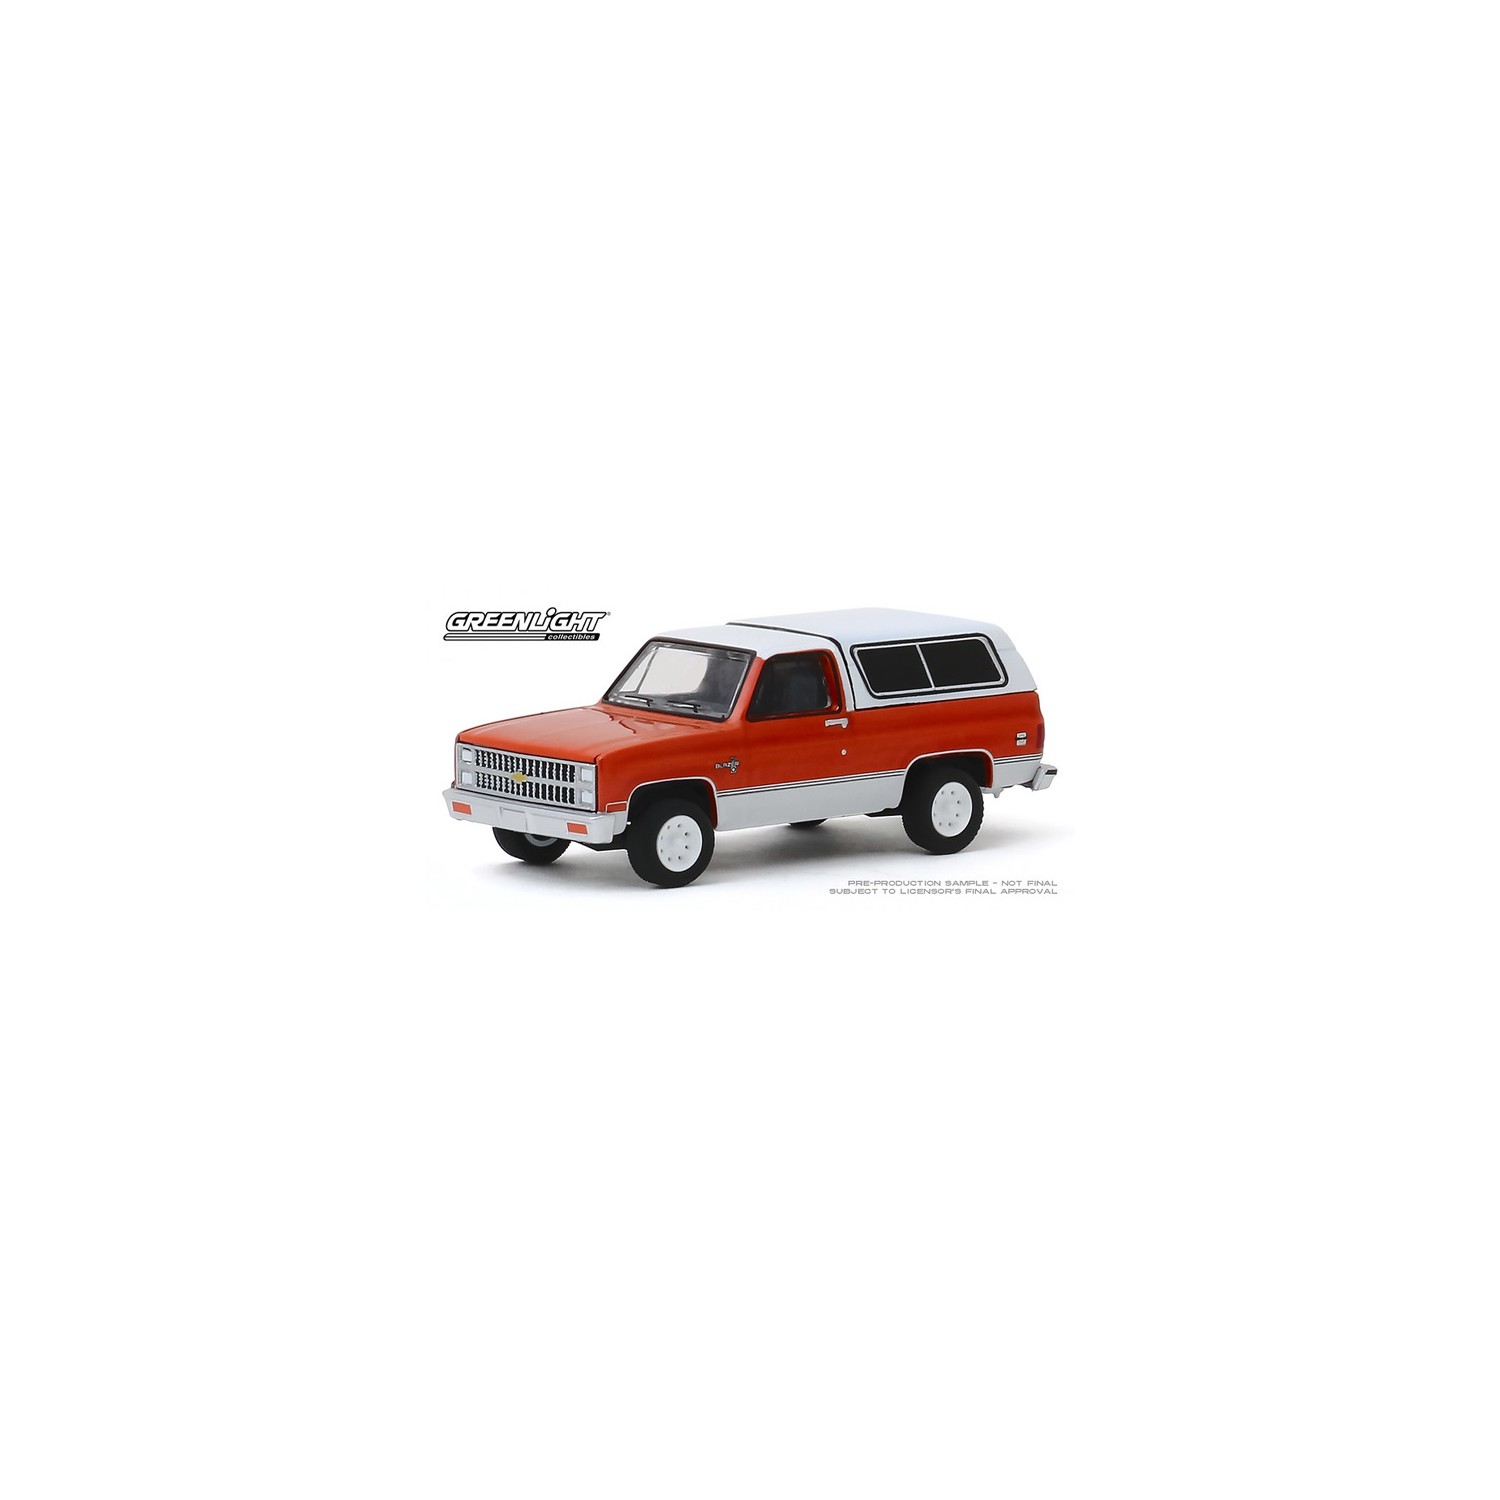 the 1981  Chevy K5 Blazer Pickup Truck in 1/64 scale Die cast by Green Light 